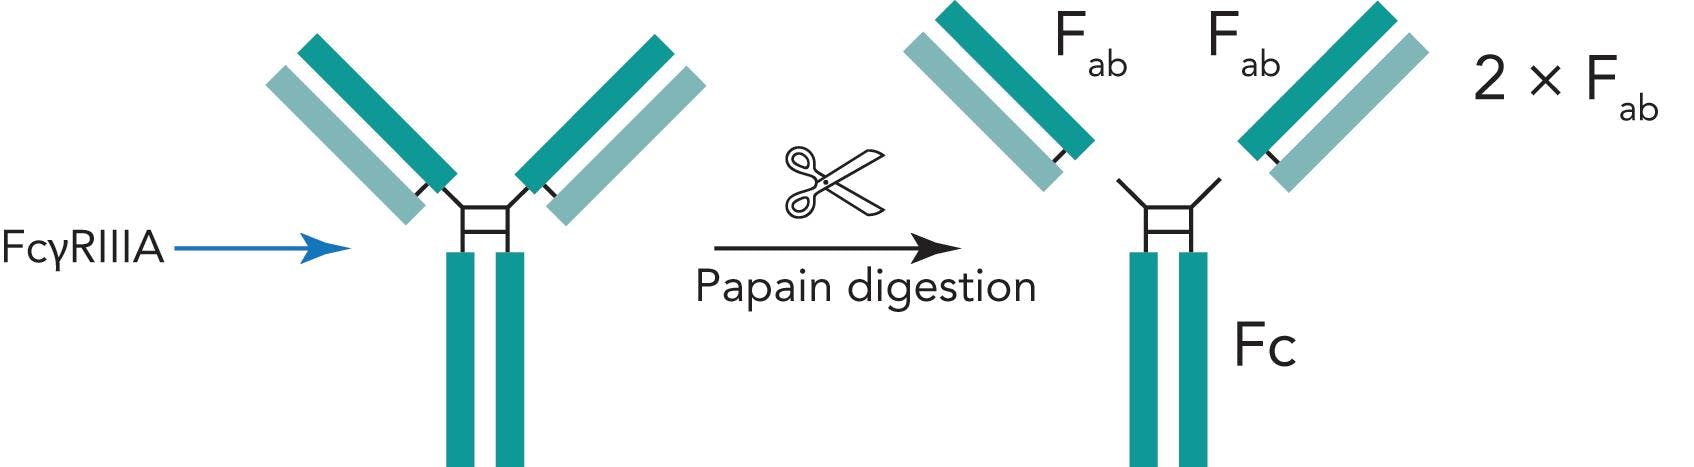 Figure 4: Schematic illustration of mAb fractionation by papain digestion